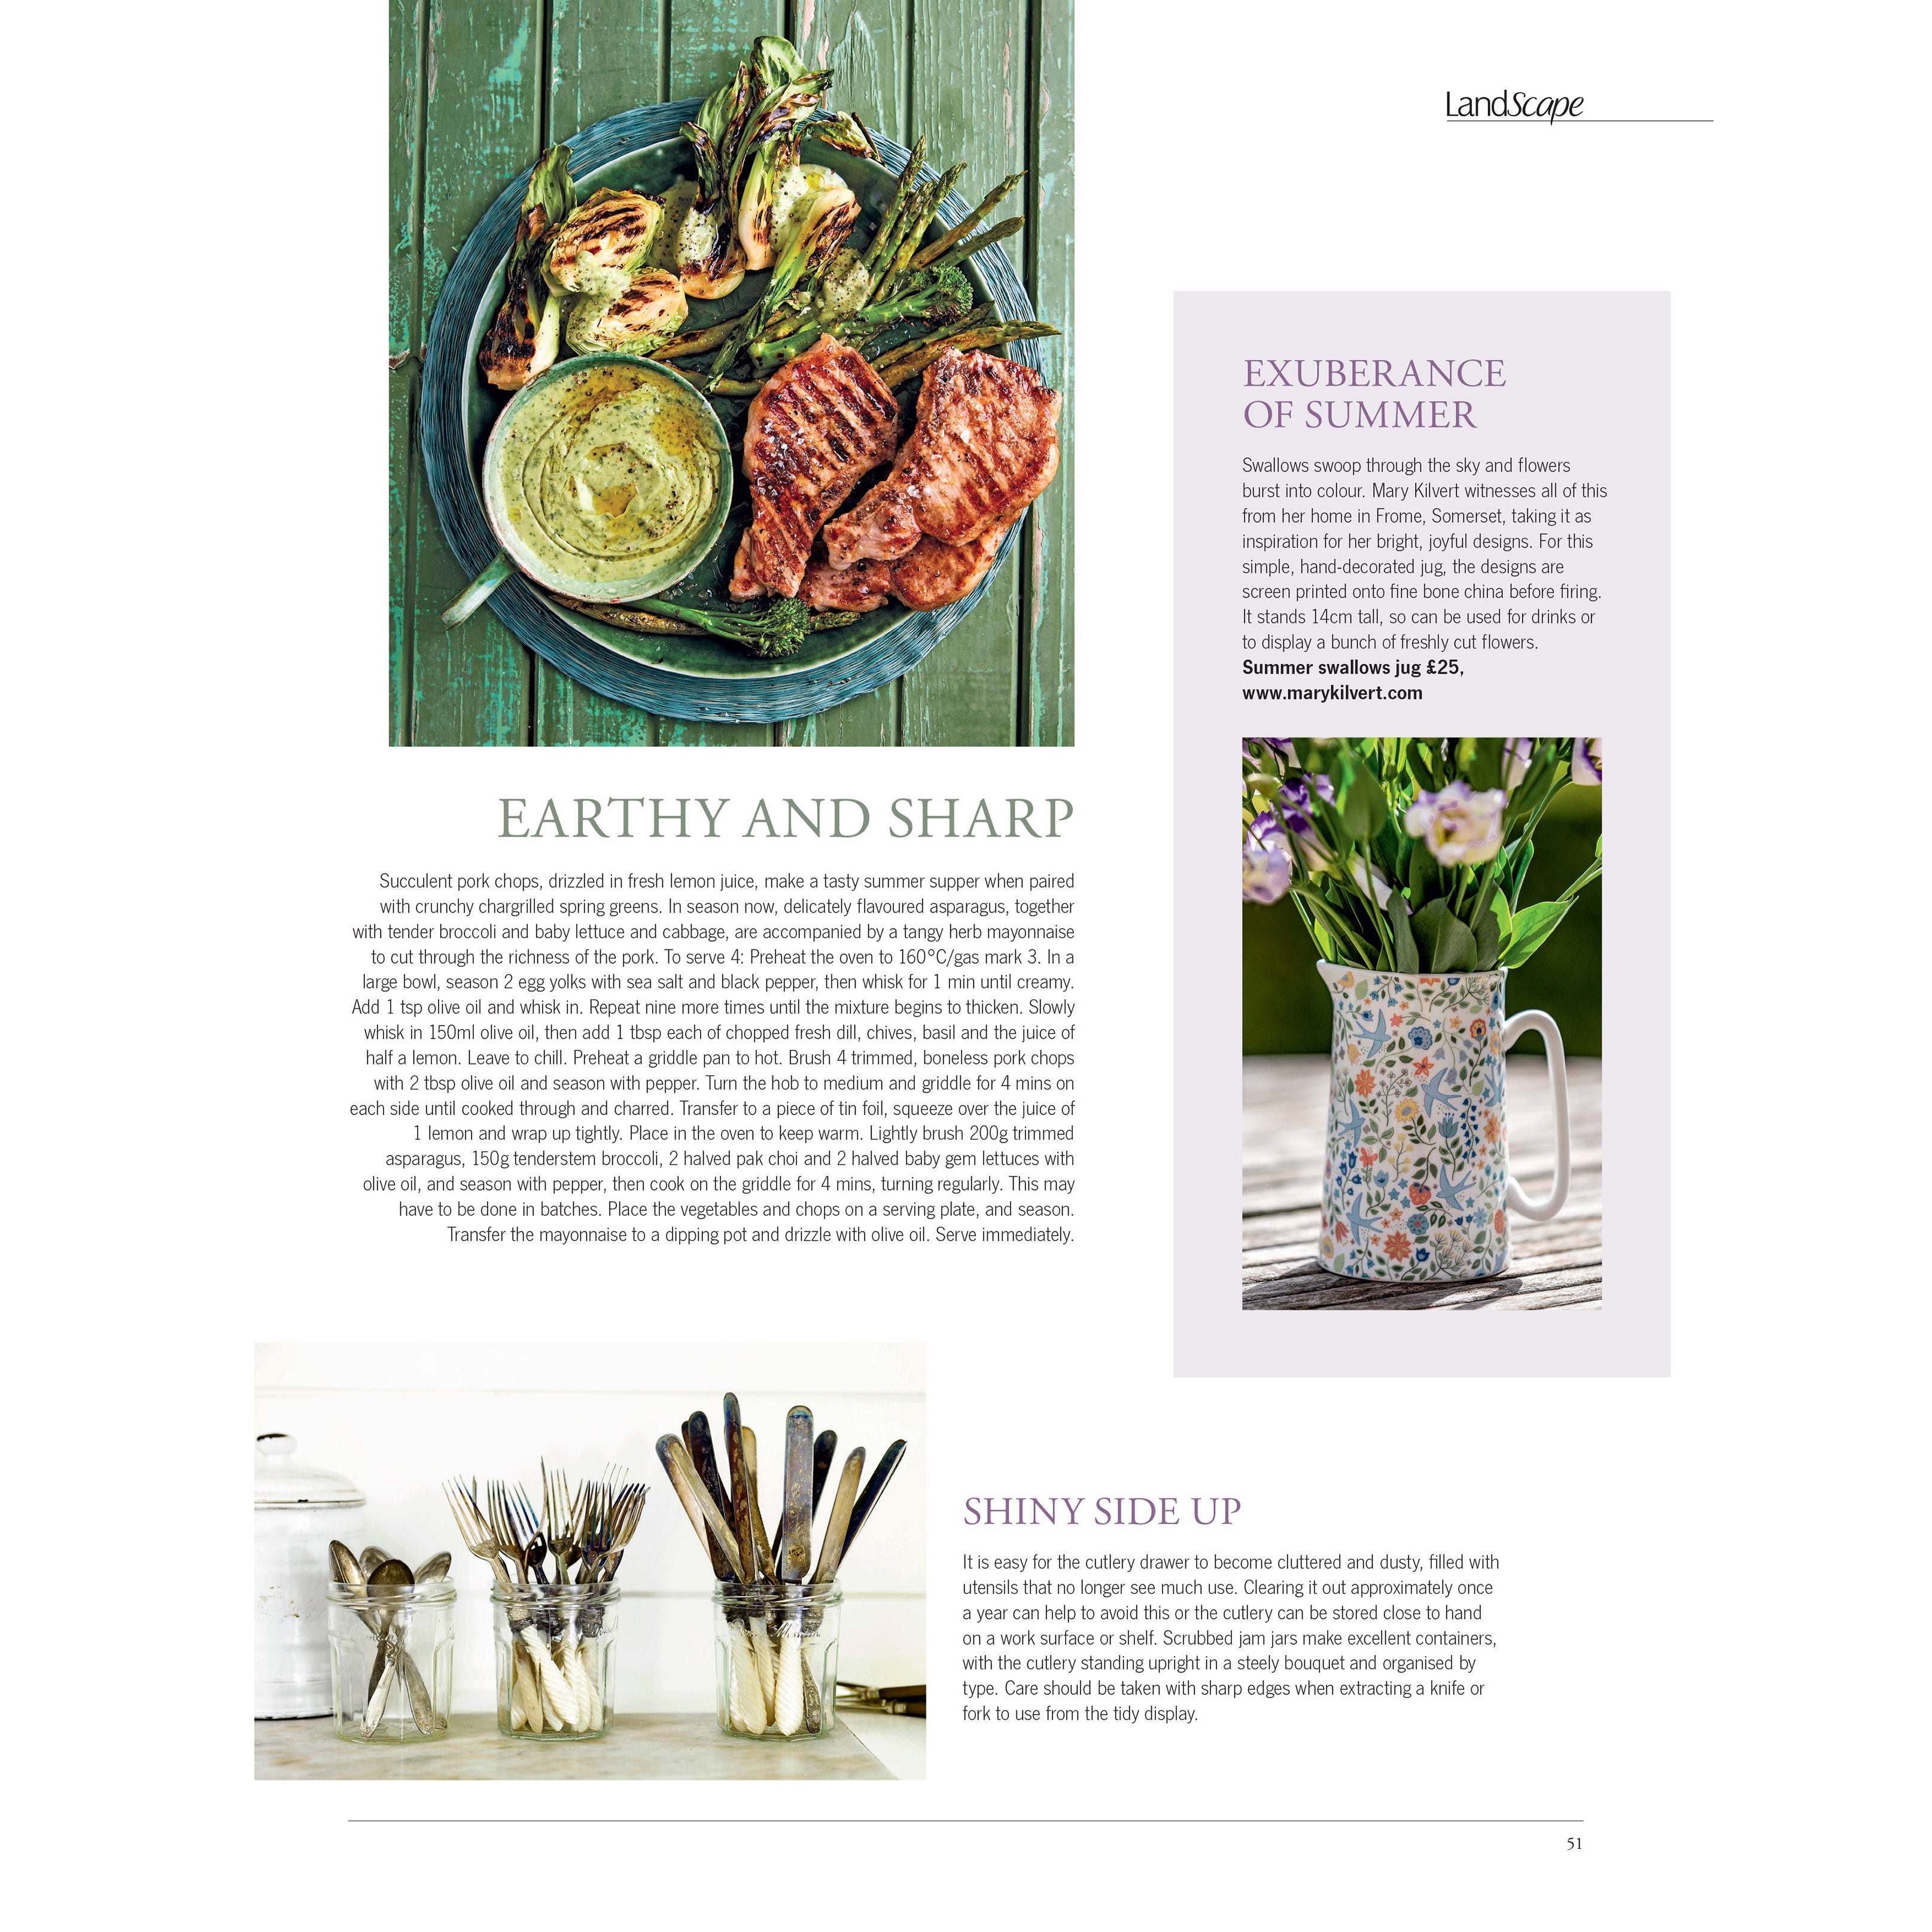 Mary Kilvert's Summer Swallows Jug as featured in LandScape magazine